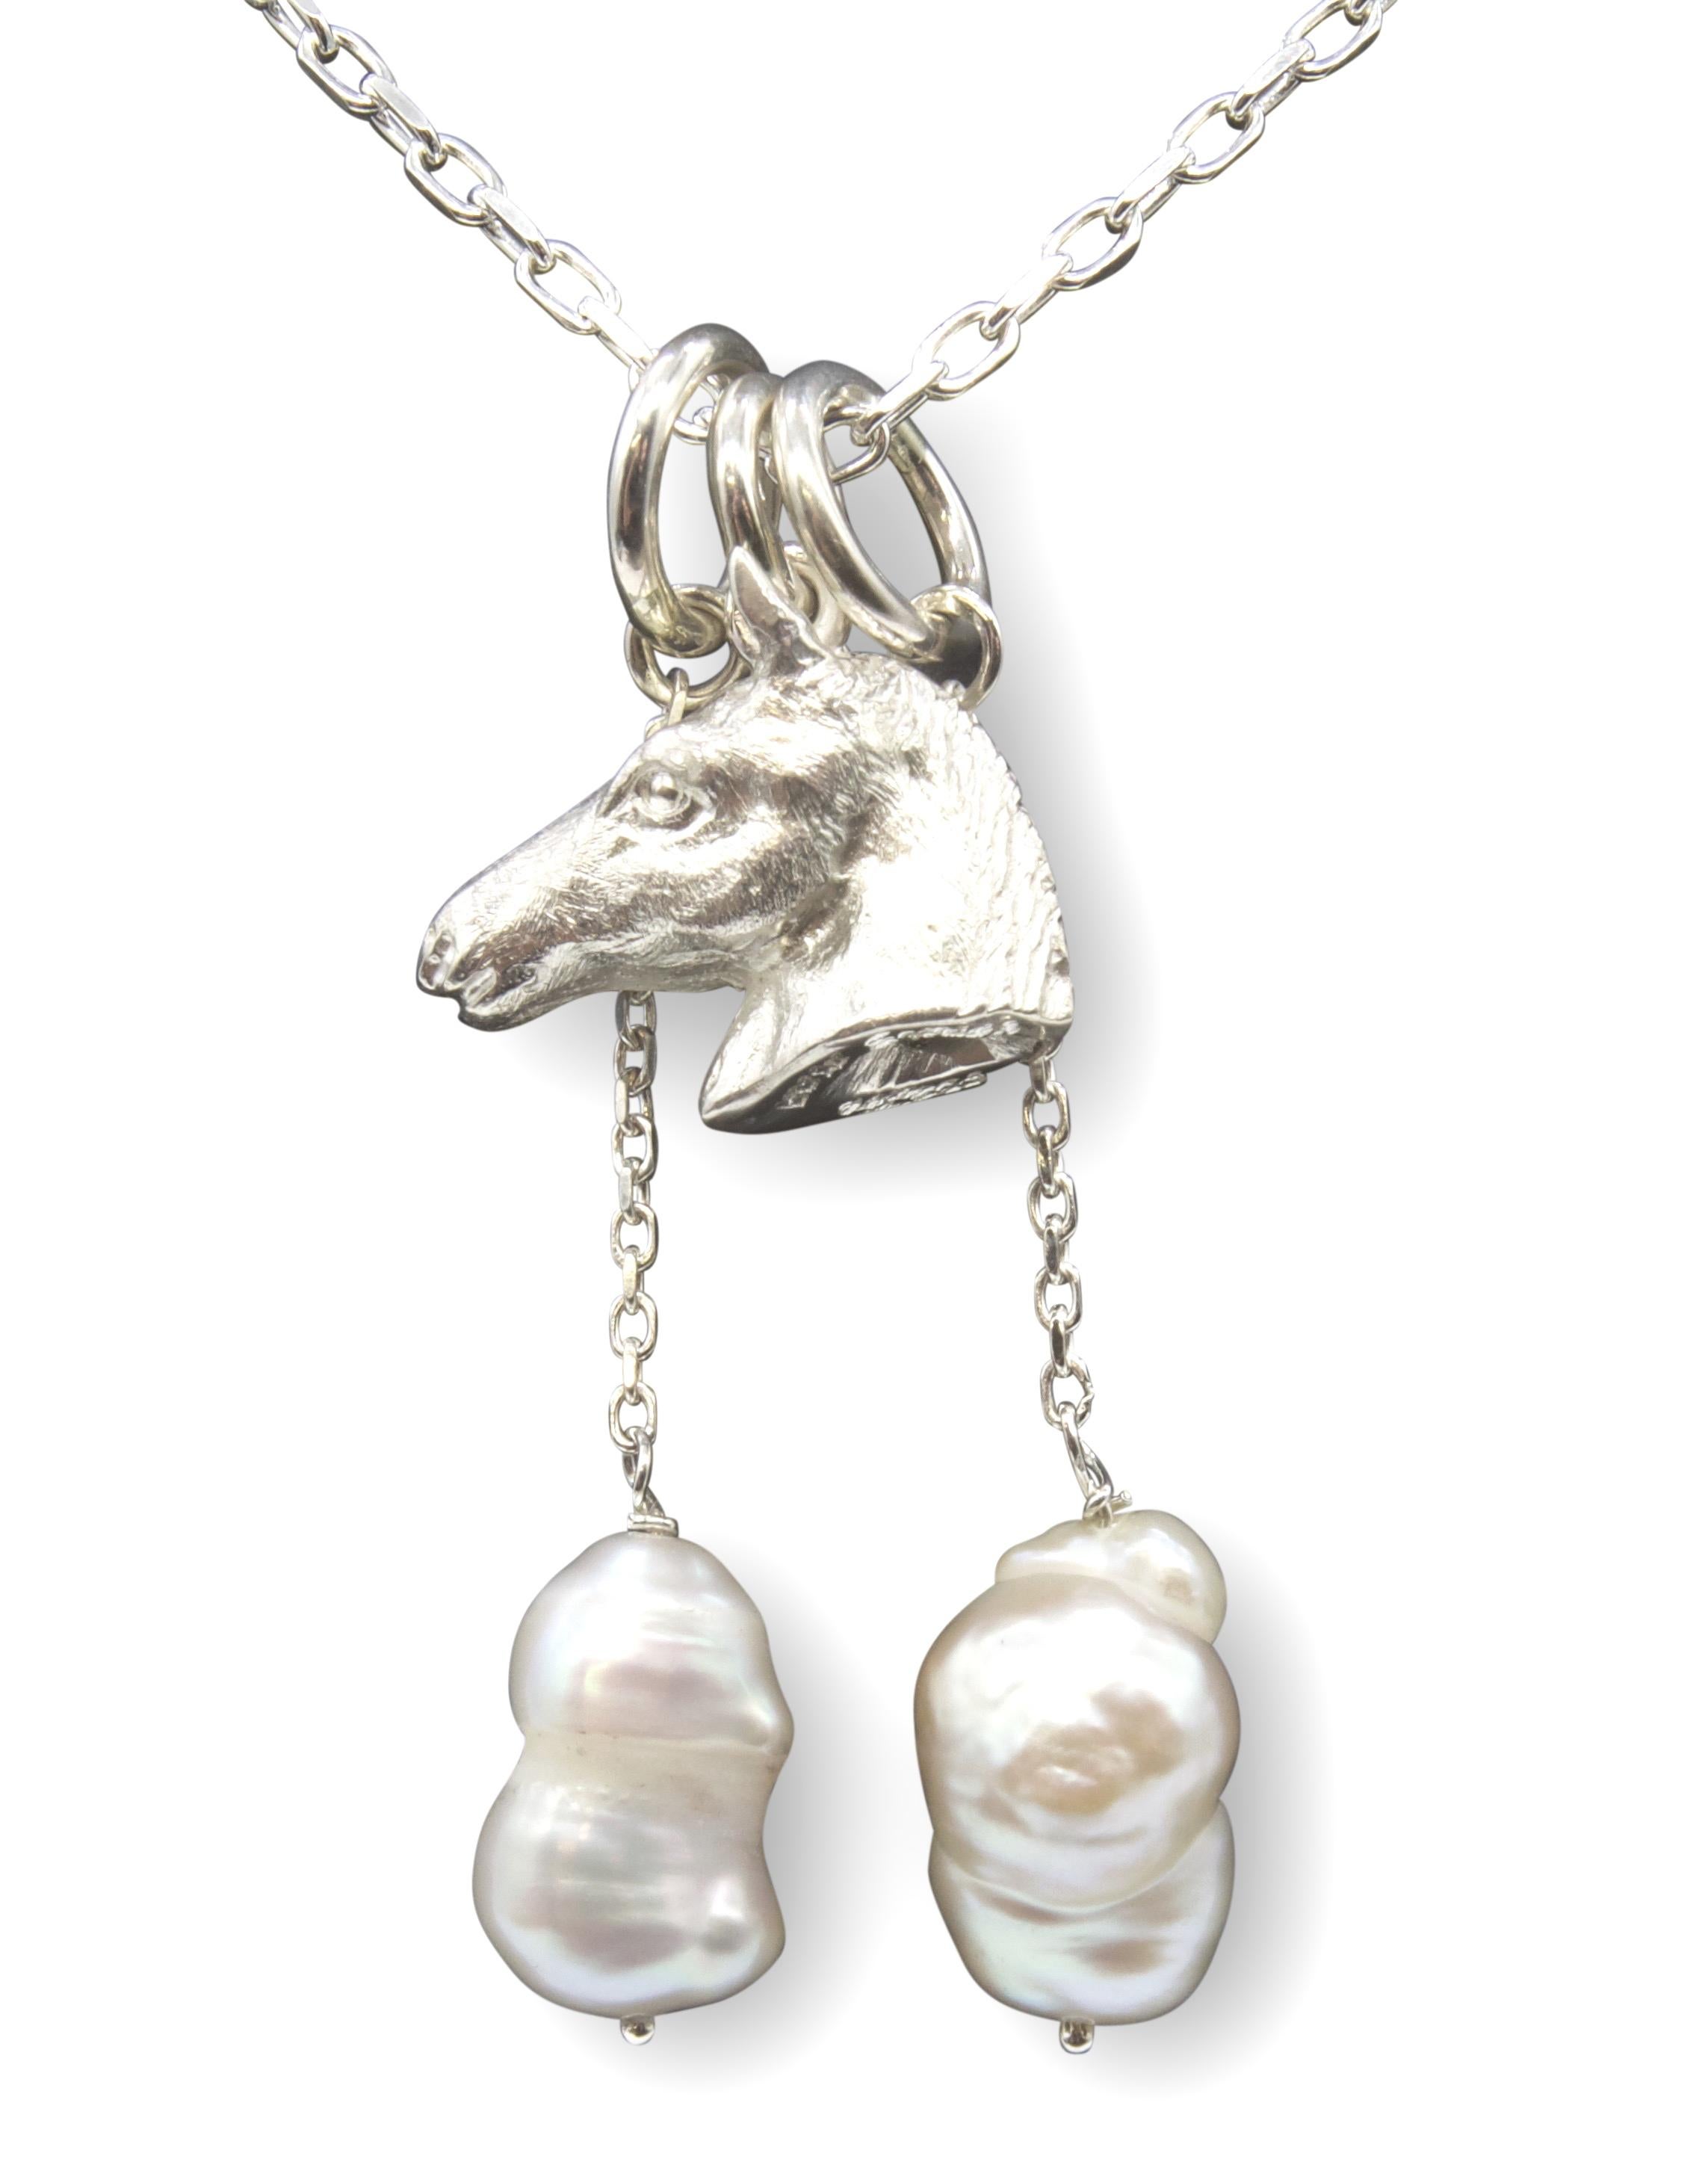 Artisan Paul Eaton Sculpted Miniature Horse Head in a Sterling Silver Charm or Pendant  For Sale